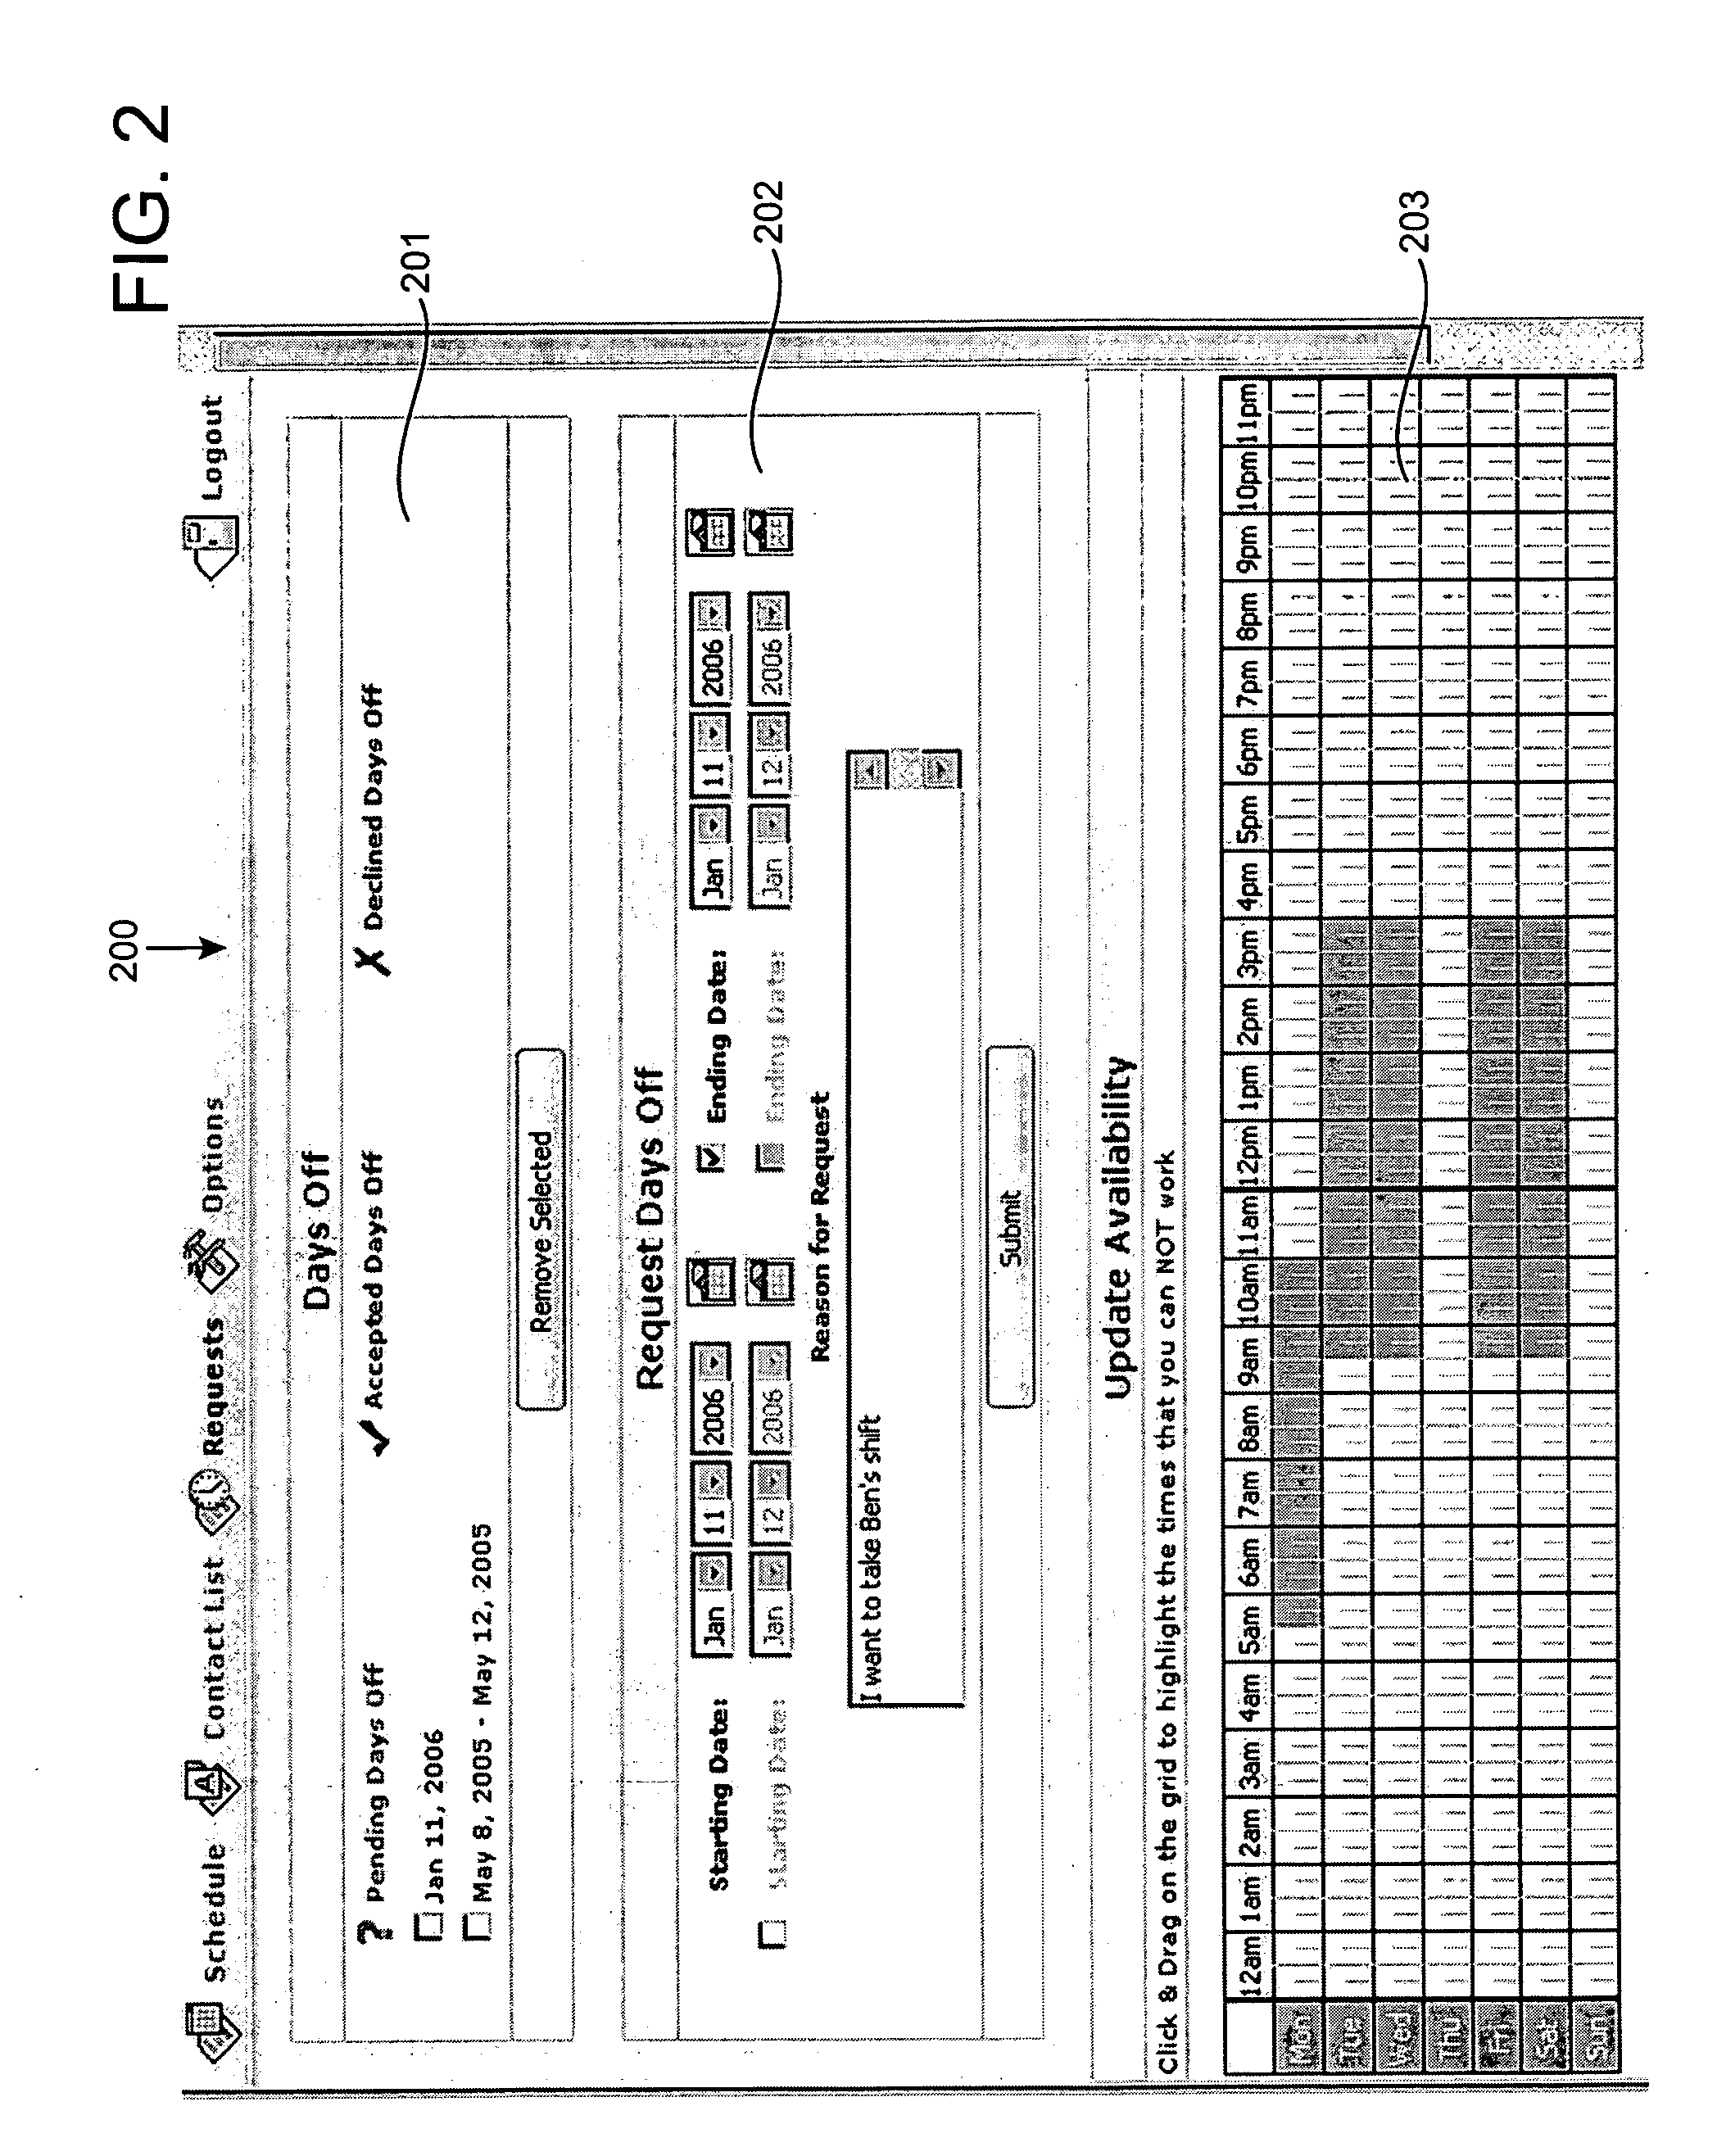 System and method for scheduling employee shifts